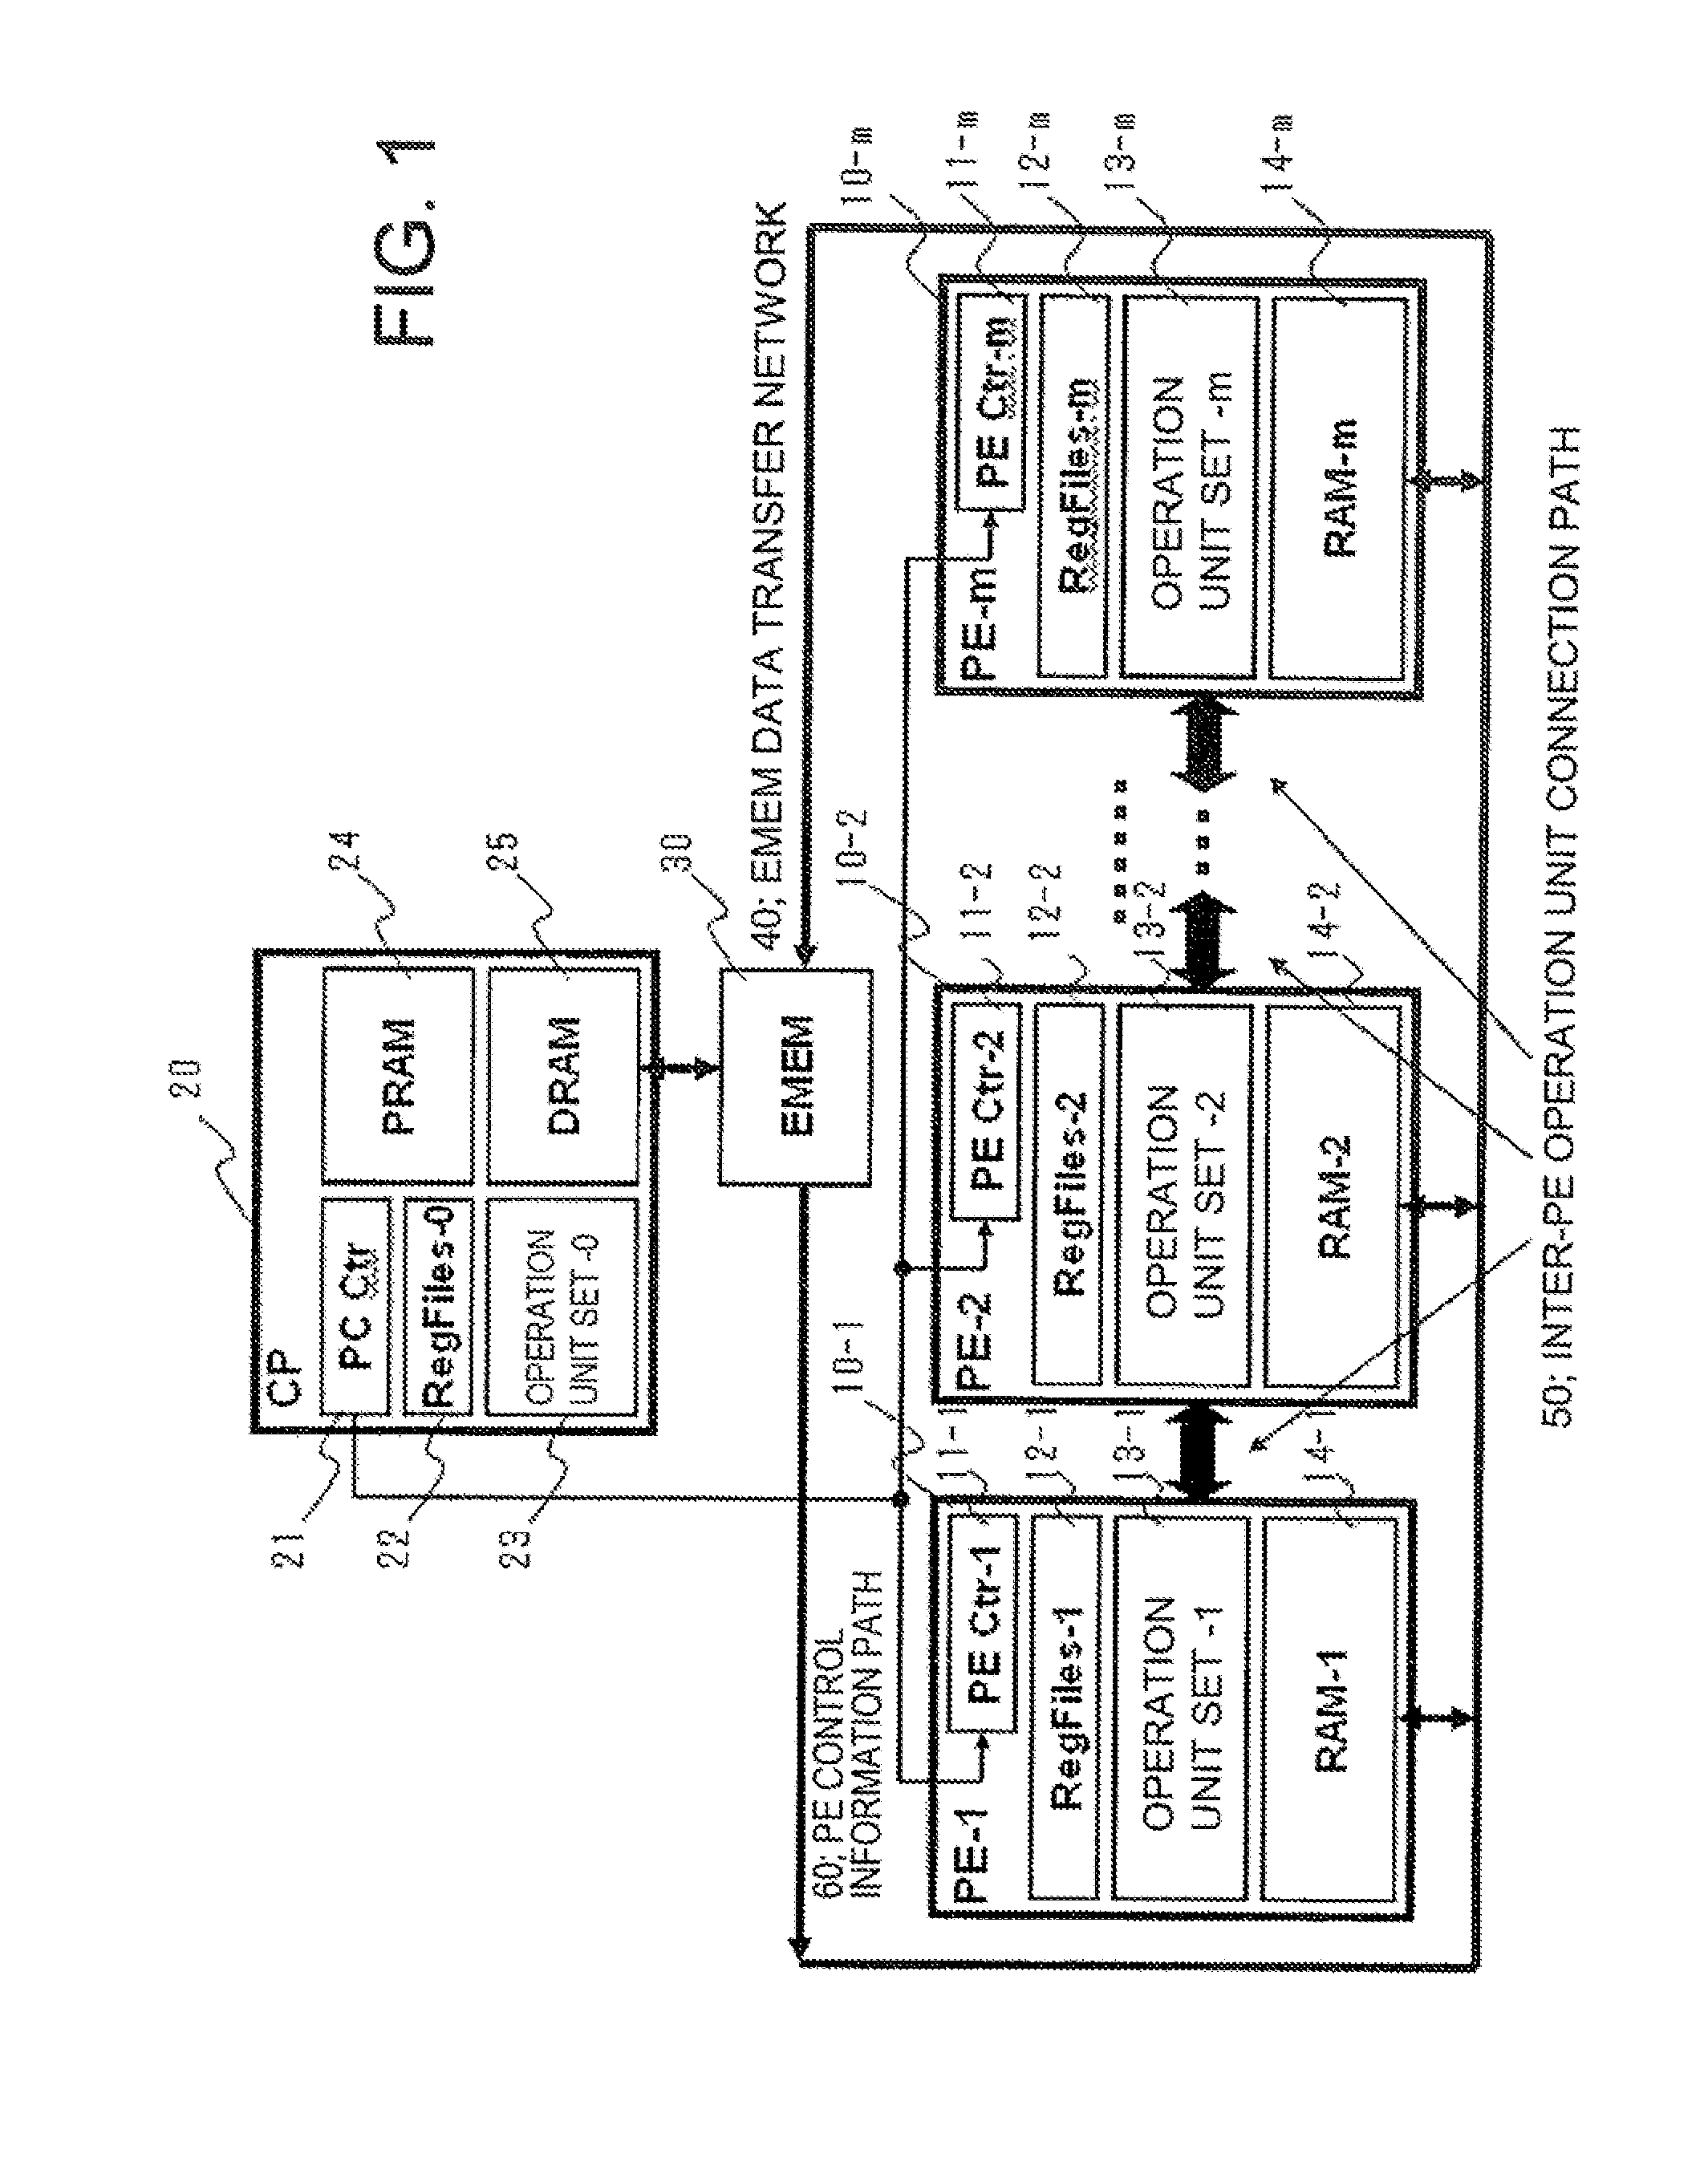 Reconfigurable simd processor and method for controlling its instruction execution